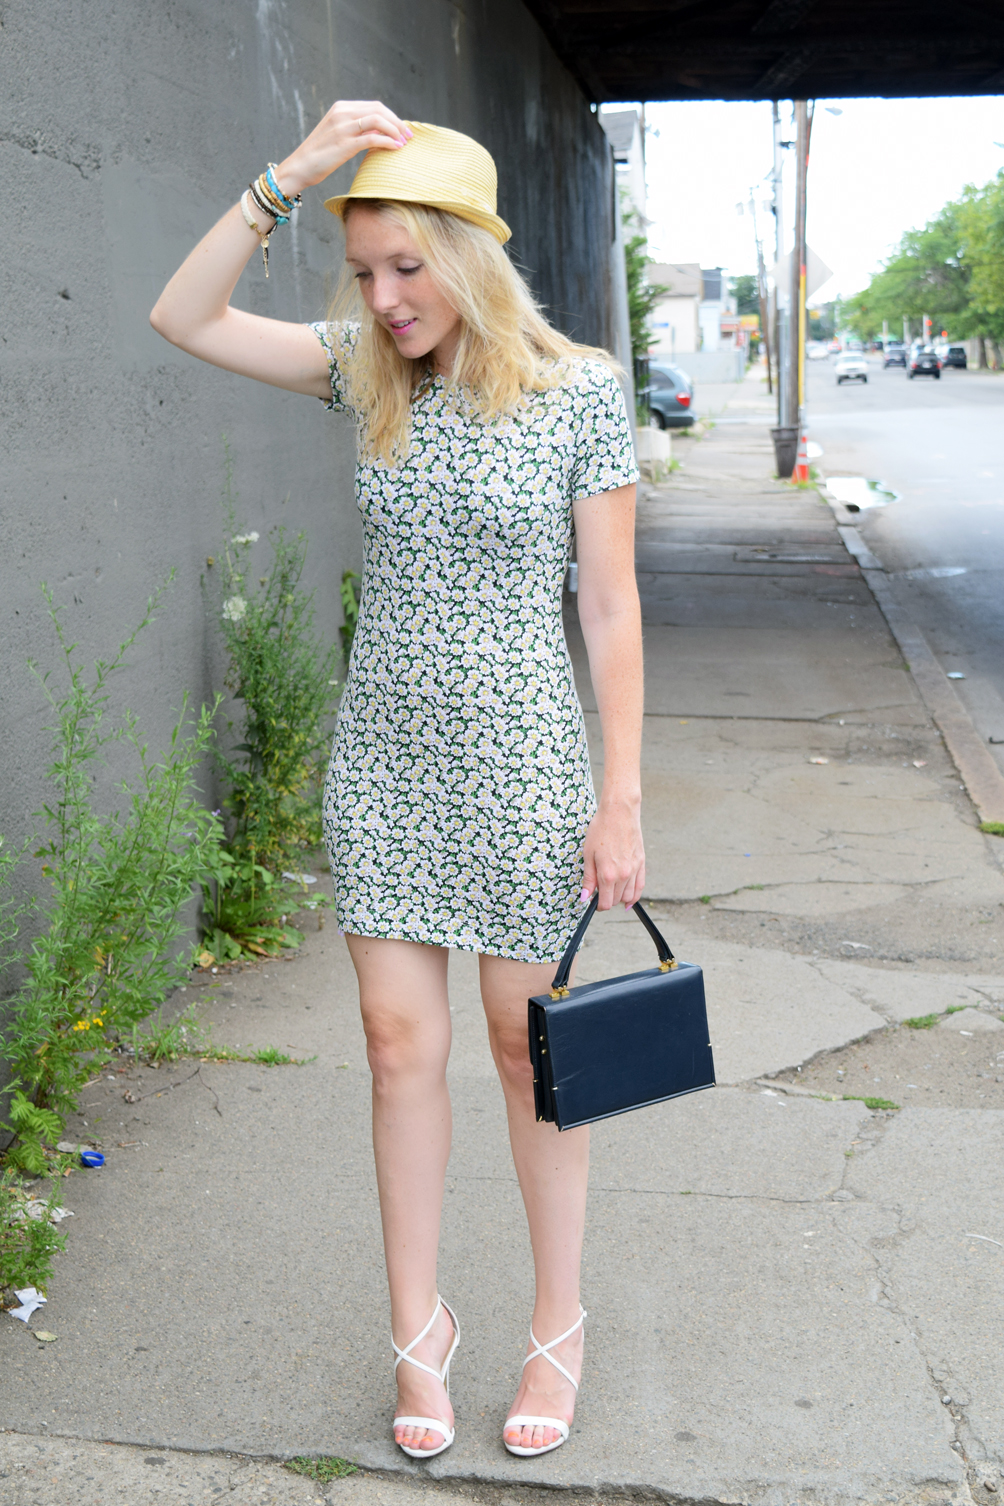 daisy chain dress with white sandals and straw fedora